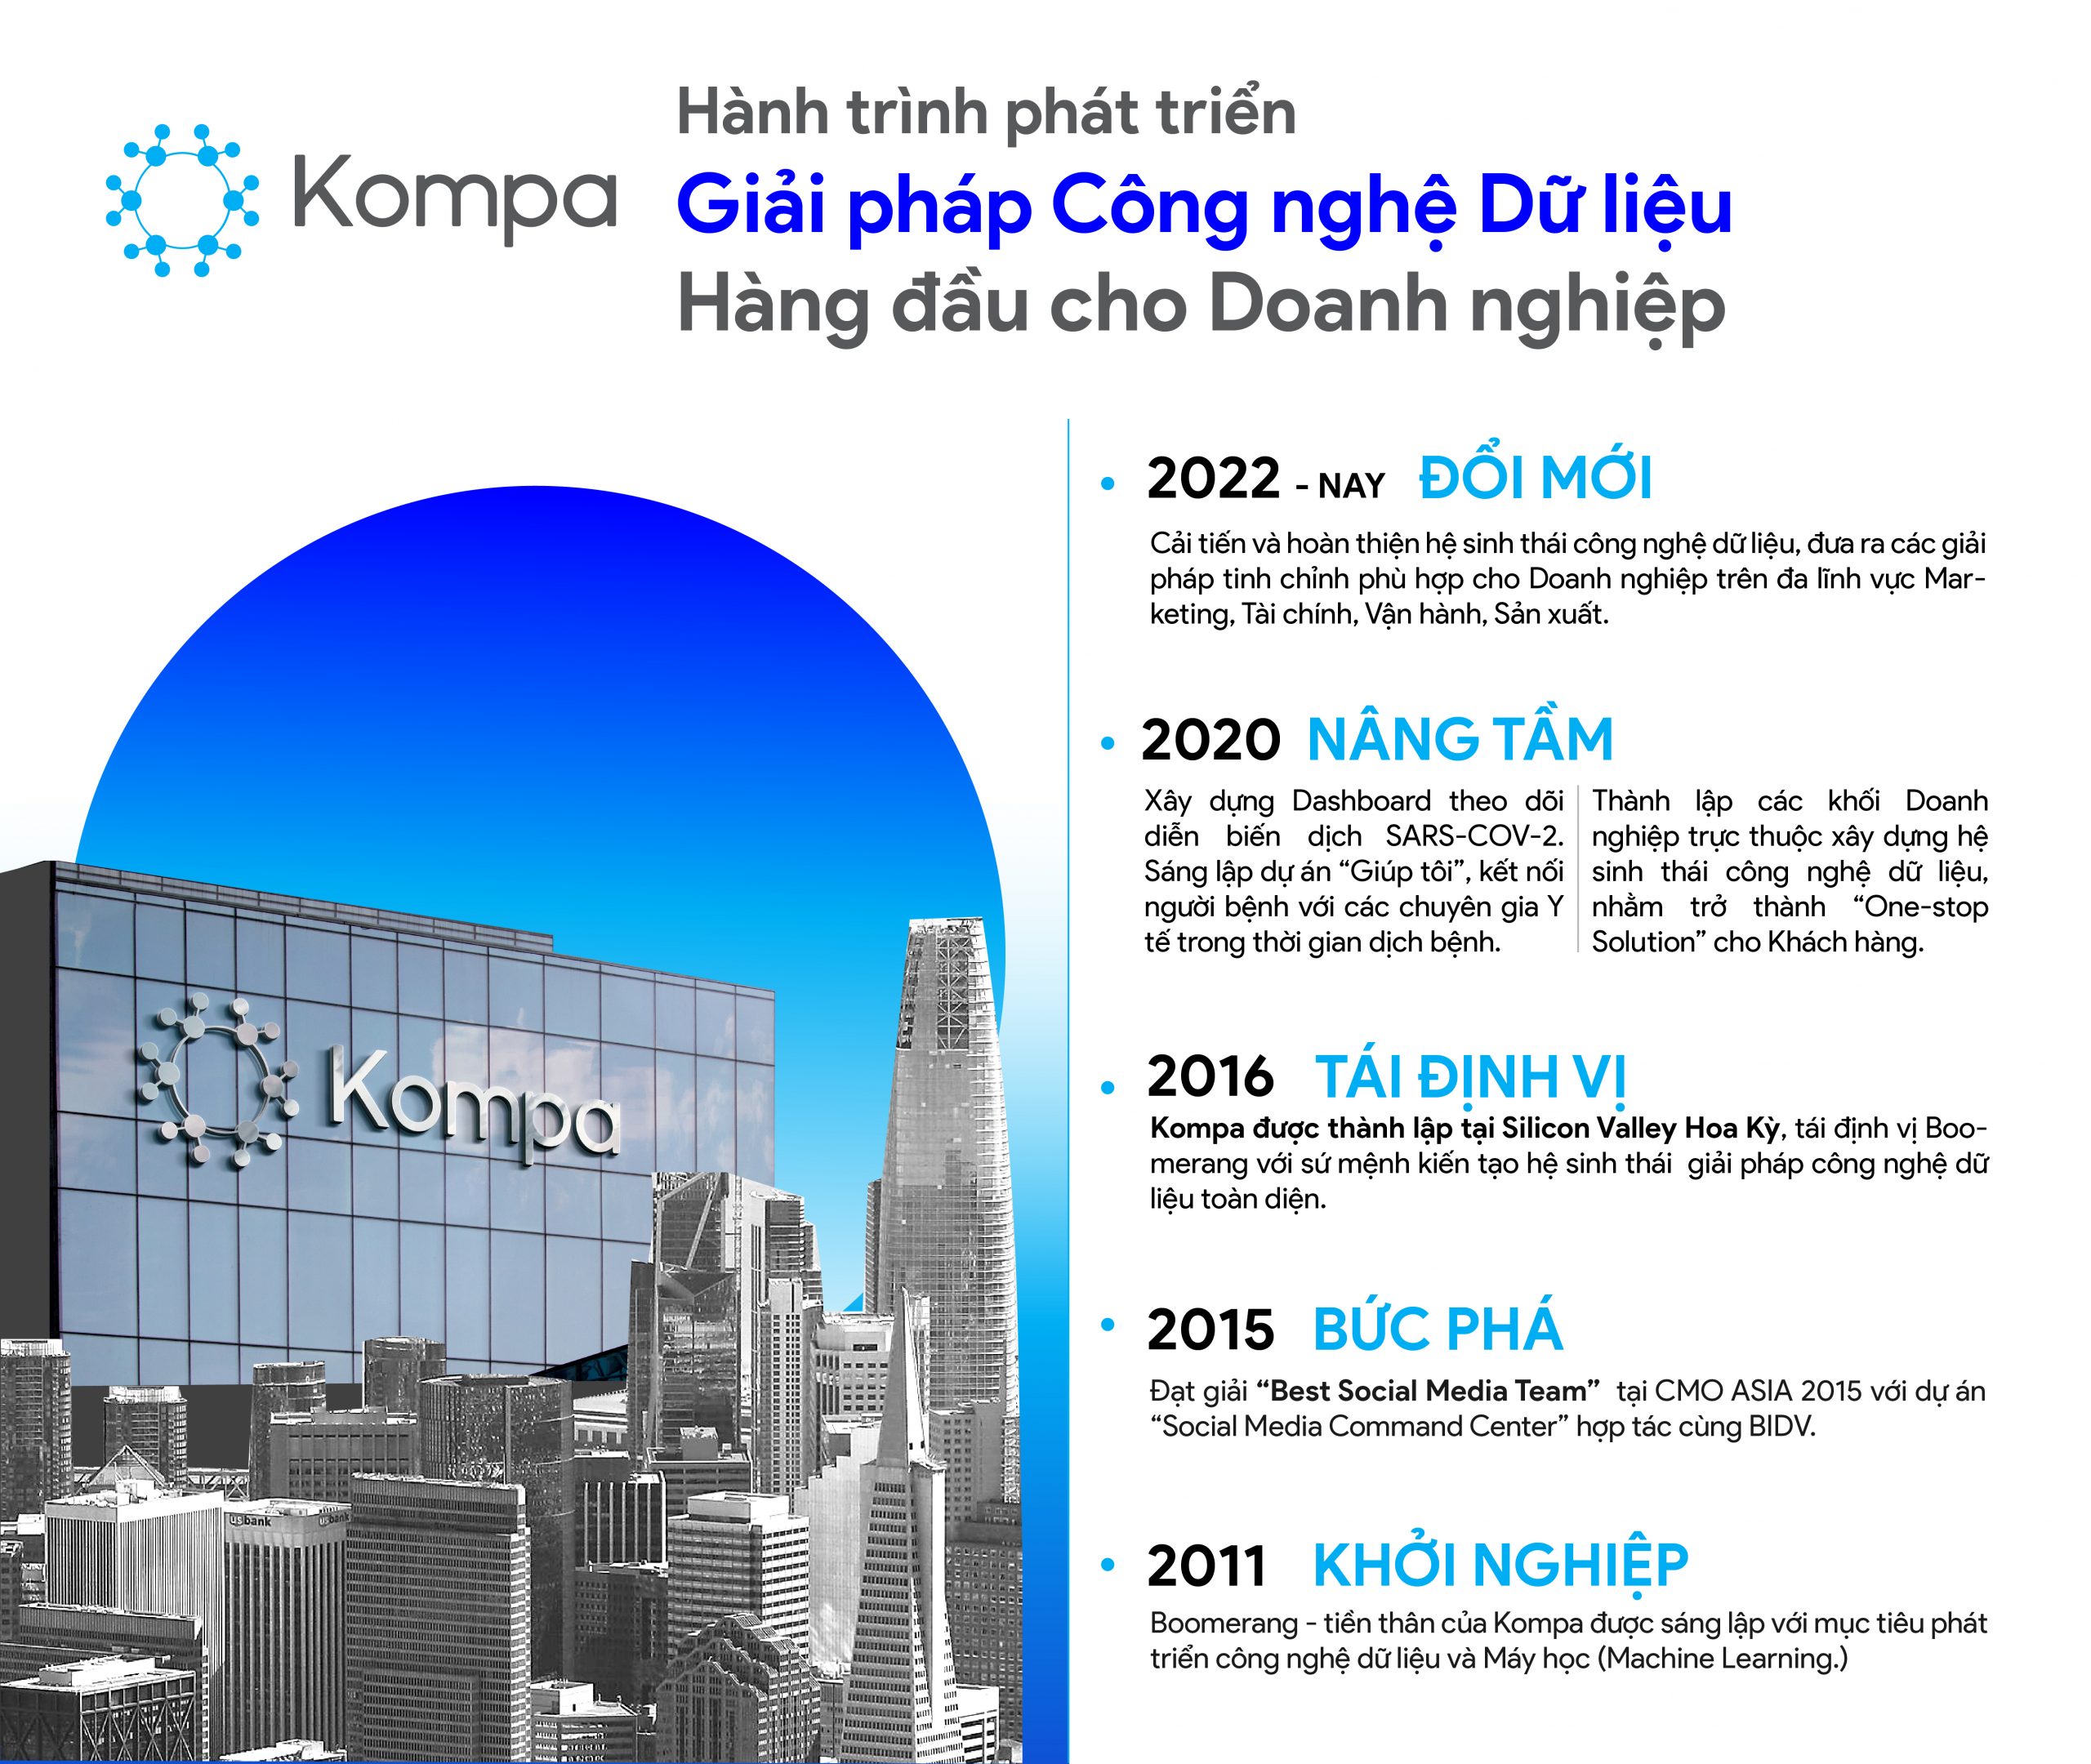 Kompa's journey of innovation and continuous development